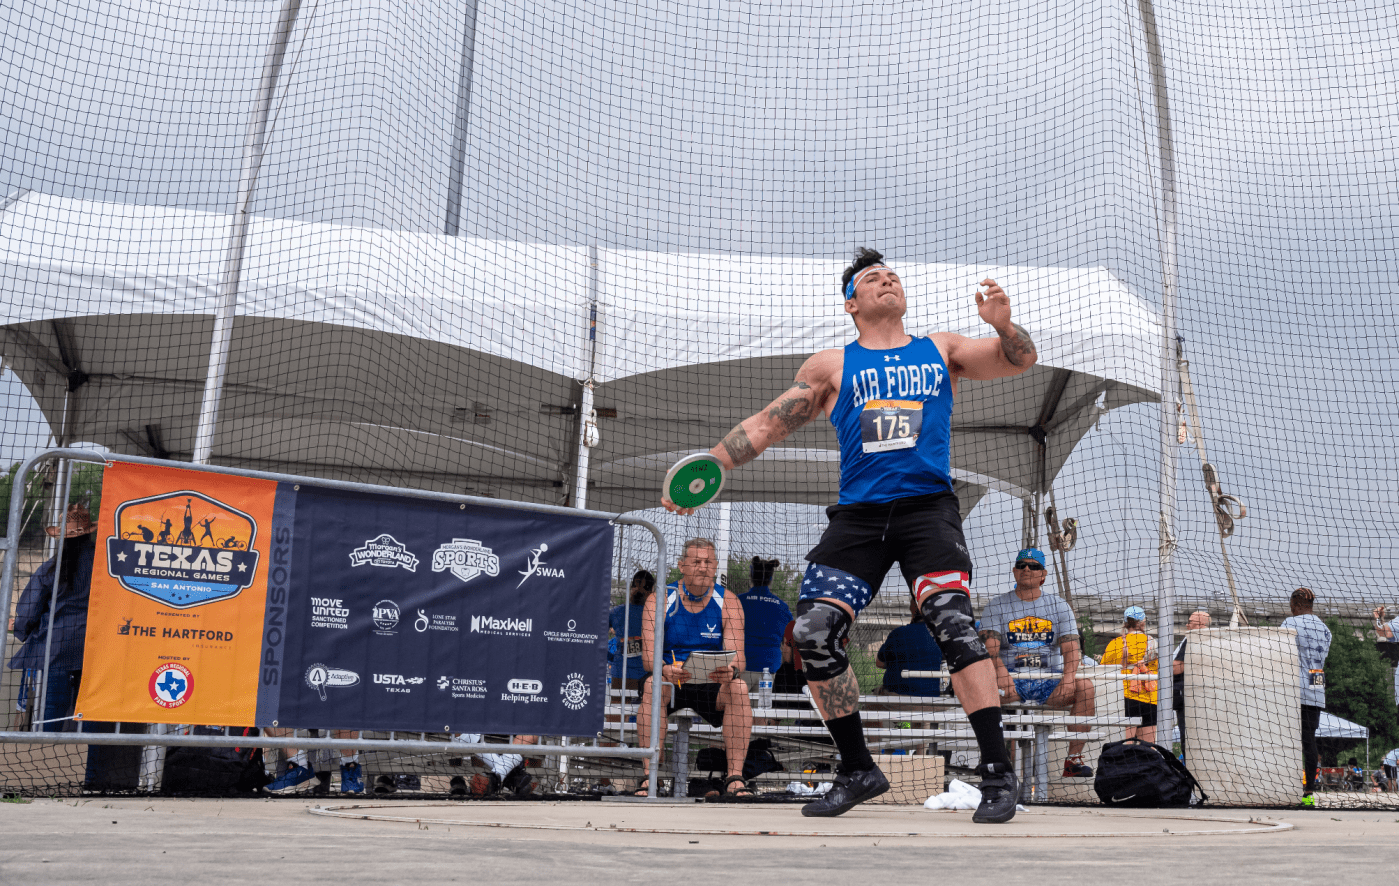 Last year, Move United hosted 26 adaptive sports competitions in 22 states for 1,537 individual athletes. This year, that number is increasing to 35 events in 24 states for even more Veteran athletes.